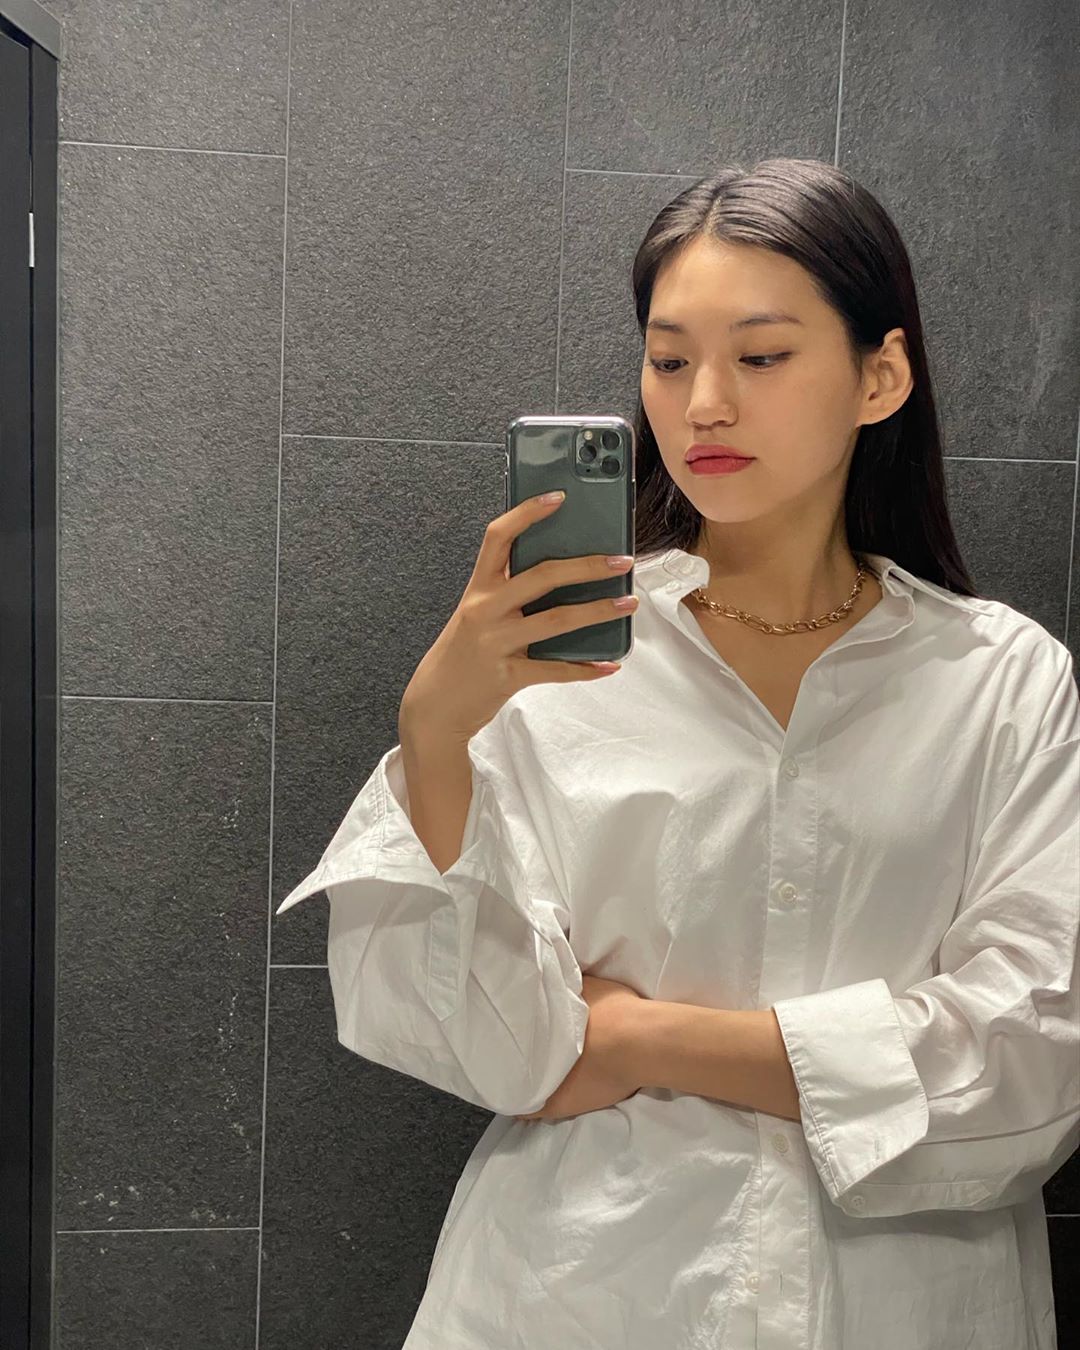 Girl group Weki Meki Kim Do-yeon showed off her chic charm in a white shirt.Kim Do-yeon posted a photo on his Instagram on Wednesday.Kim Do-yeon in the photo is wearing a white shirt with long straight hair and taking a mirror selfie with cellphone. Kim Do-yeon looking at cellphone is chic.Eyes resembling cats and sleek jawlines also attract attention.The fans responded in various ways such as I tore out the magazine, I am pretty sister, I will call you sister, Sick idol.Meanwhile, Weki Meki, which Kim Do-yeon belongs to, released the digital single Dazzle Dazzle (DAZZLE DAZZLE) last month.Photo Kim Do-yeon SNS